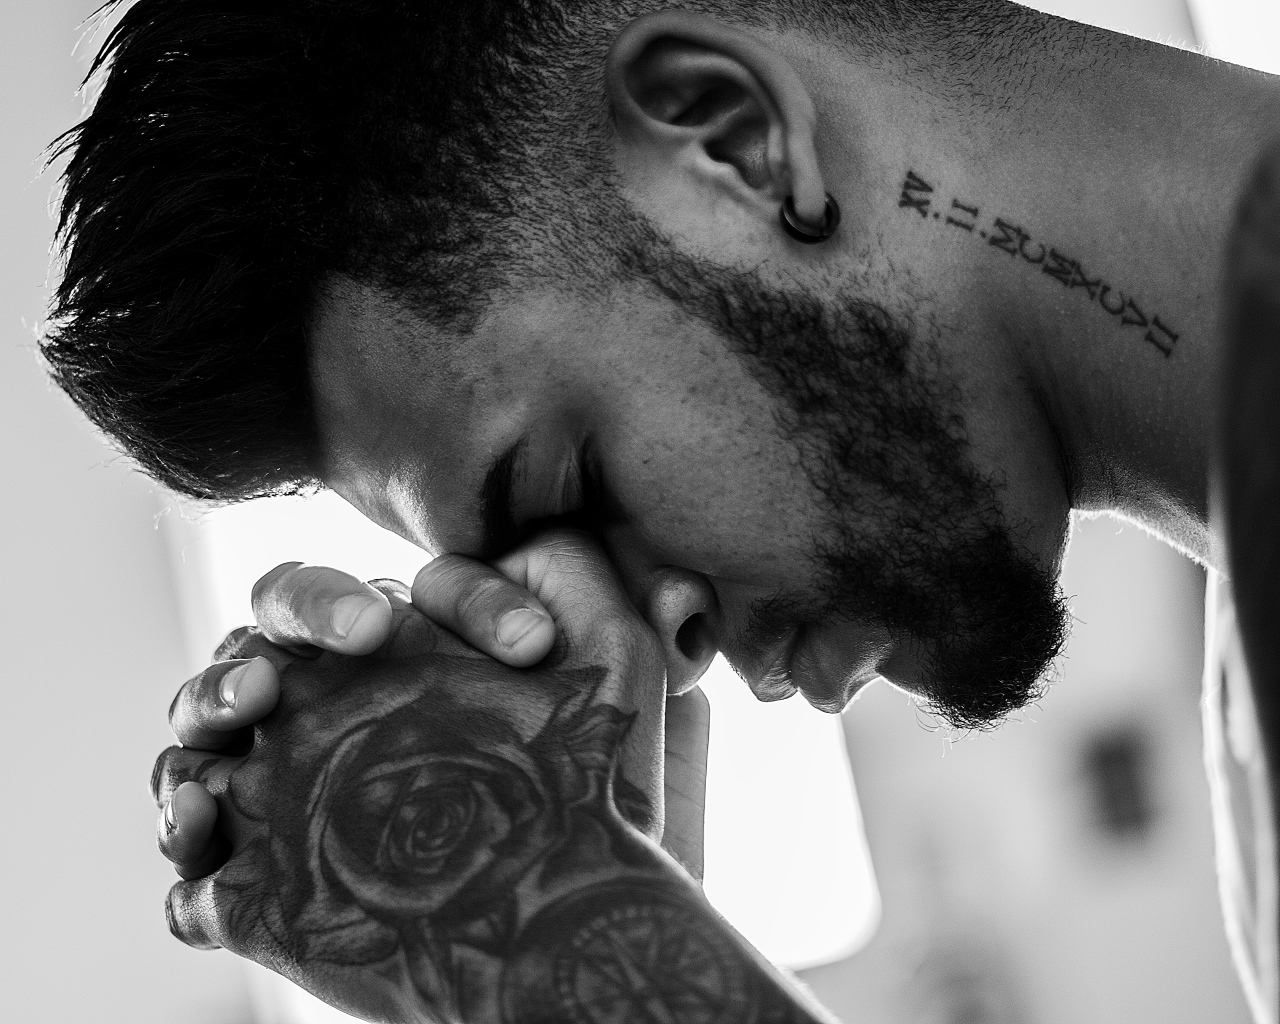 A man with tattoos on his arm and neck